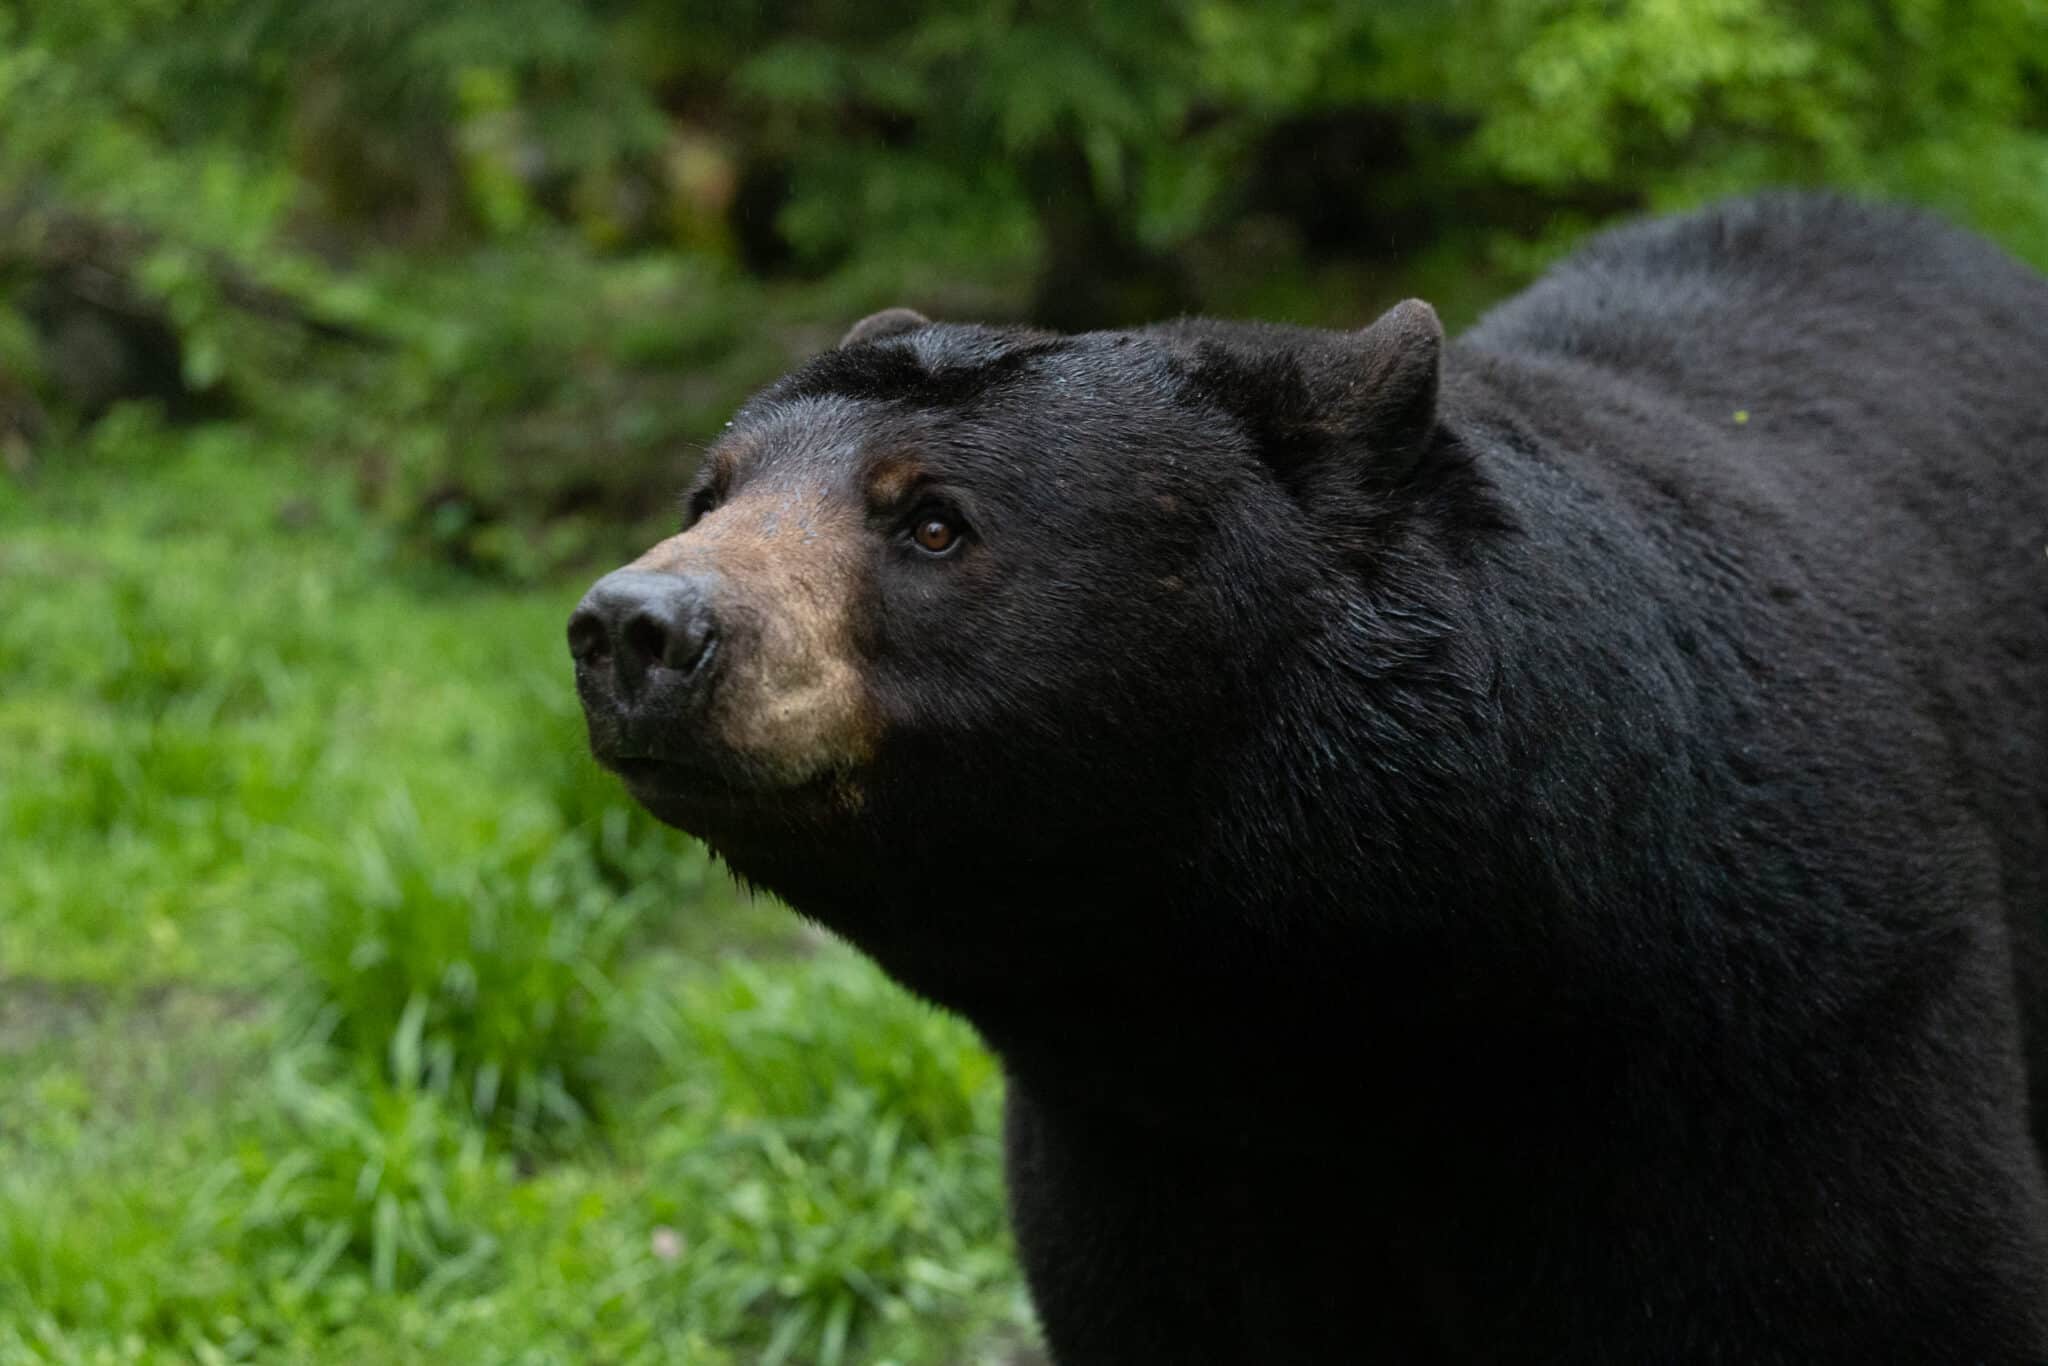 A black bear in an east-coast forest using its powerful nose to pick up scents on the wind.